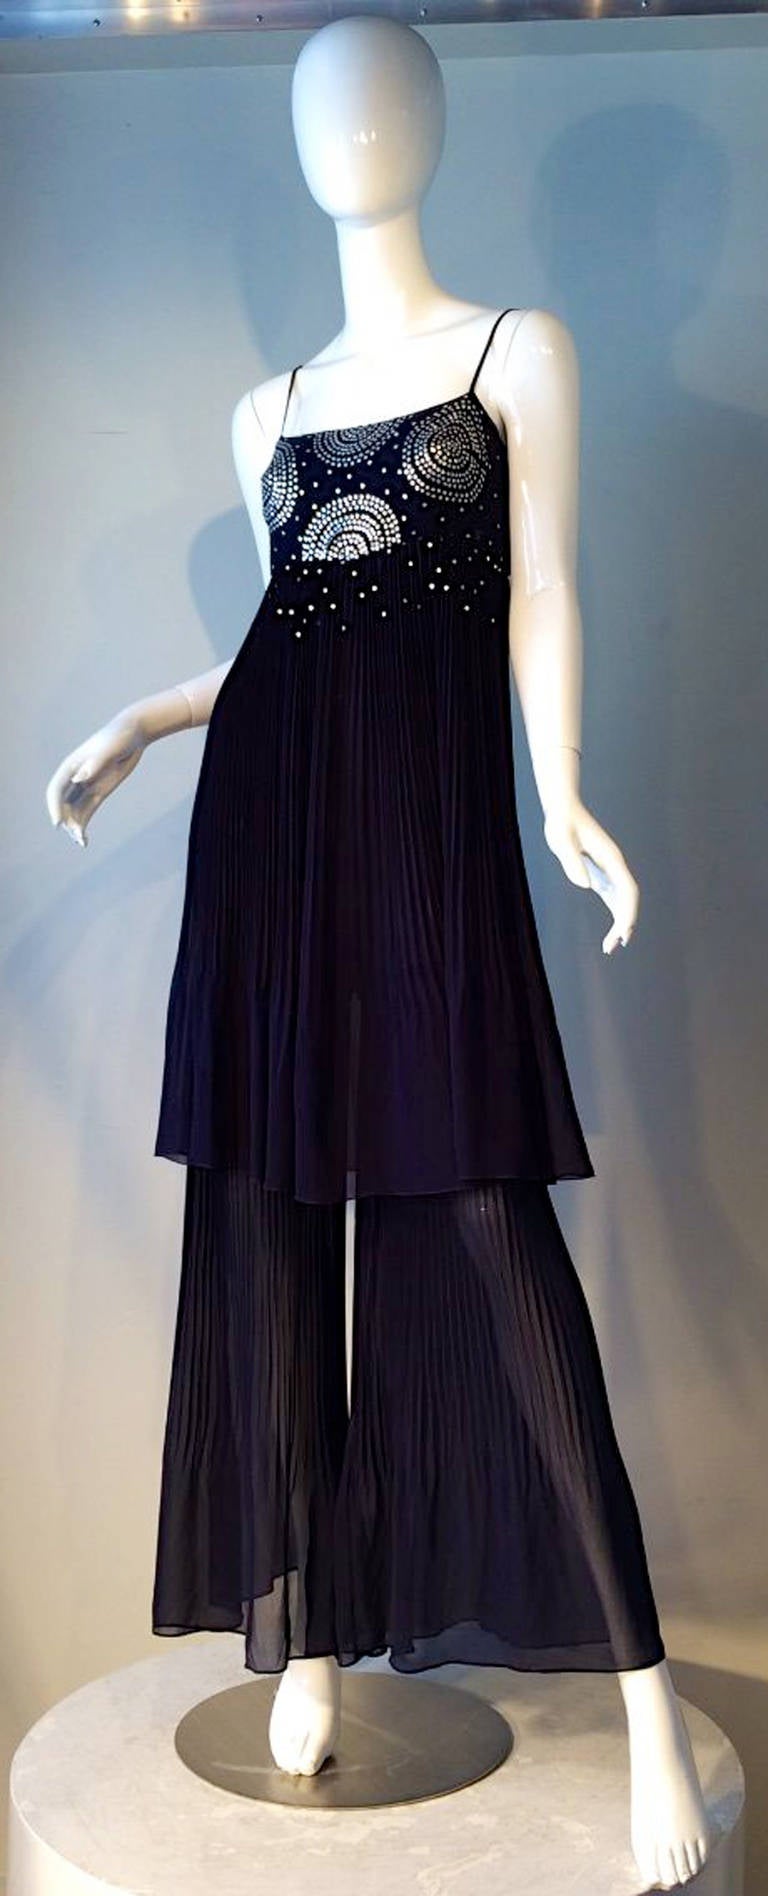 A fine Chanel evening jumpsuit. Sunburst pleated navy silk chiffon item features a sequin decorated bodice and wide pleated trousers. Item fully silk lined and zips up side. Pristine appears unworn.